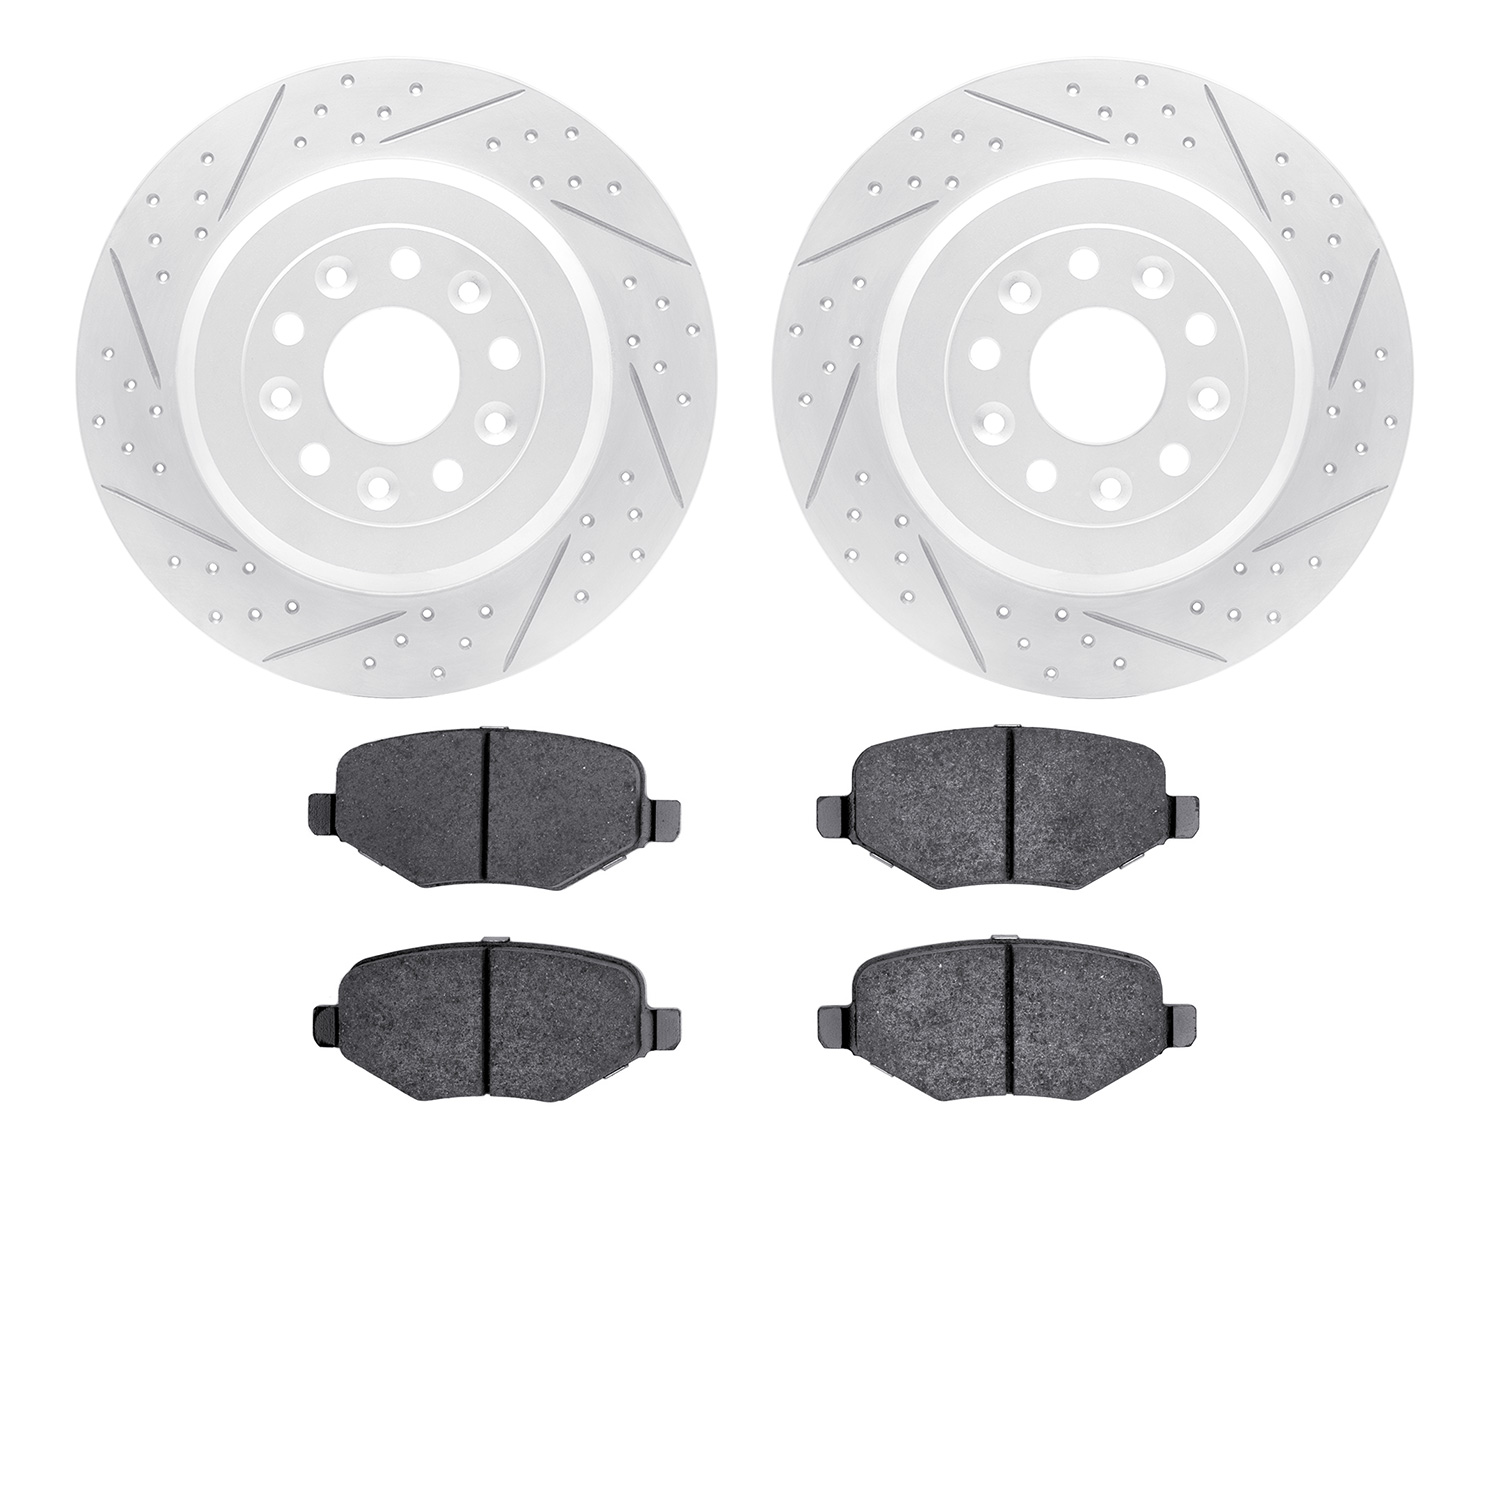 2502-54195 Geoperformance Drilled/Slotted Rotors w/5000 Advanced Brake Pads Kit, 2009-2019 Ford/Lincoln/Mercury/Mazda, Position: